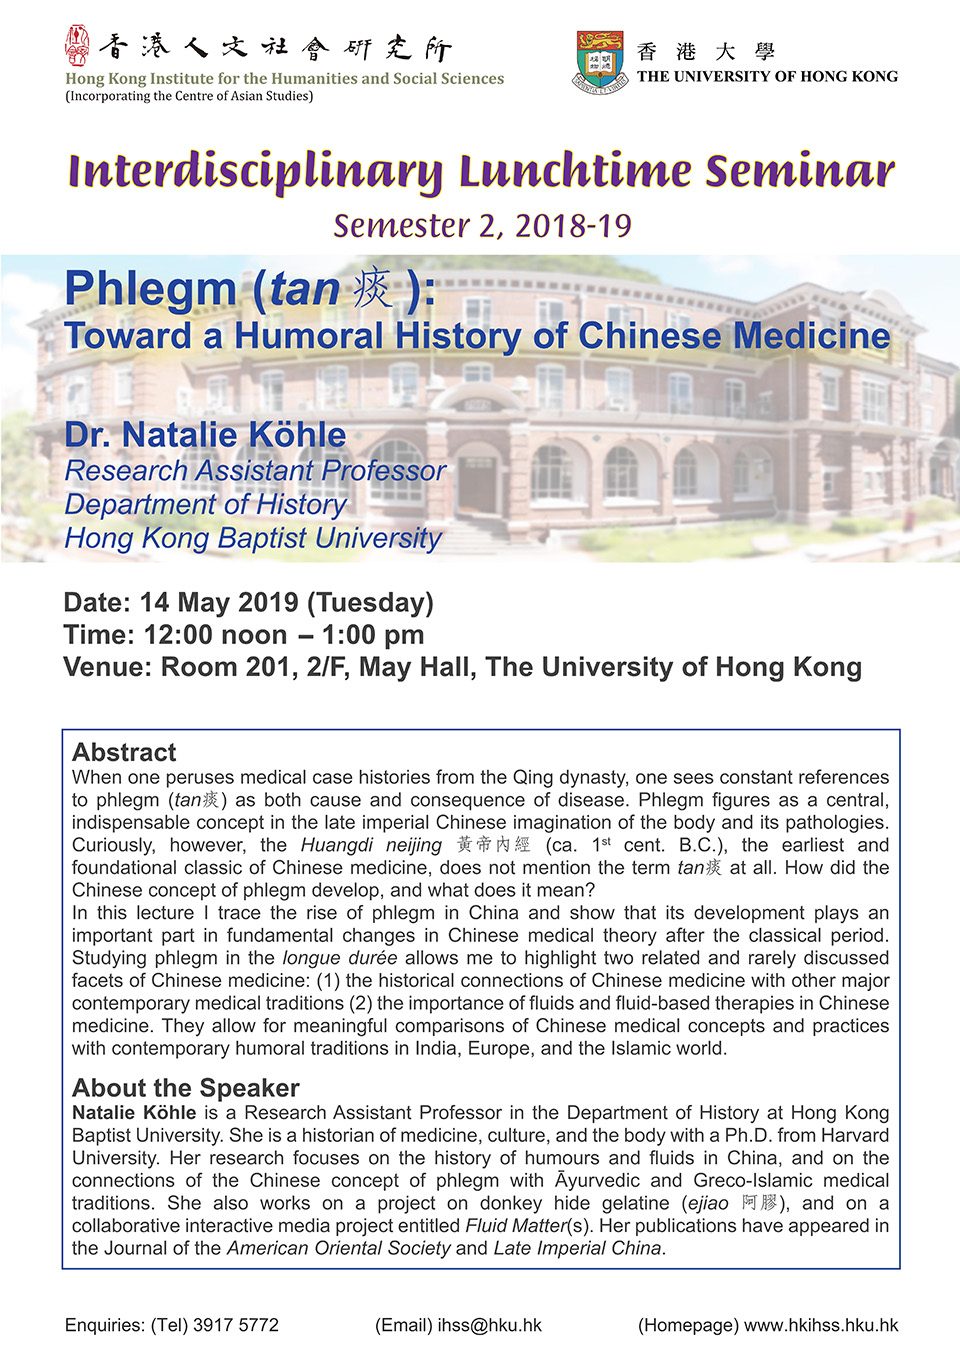 Interdisciplinary Lunchtime Seminar on “Phlegm (tan 痰 ):Toward a Humoral History of Chinese Medicine” by Dr. Natalie Köhle (May 14, 2019)